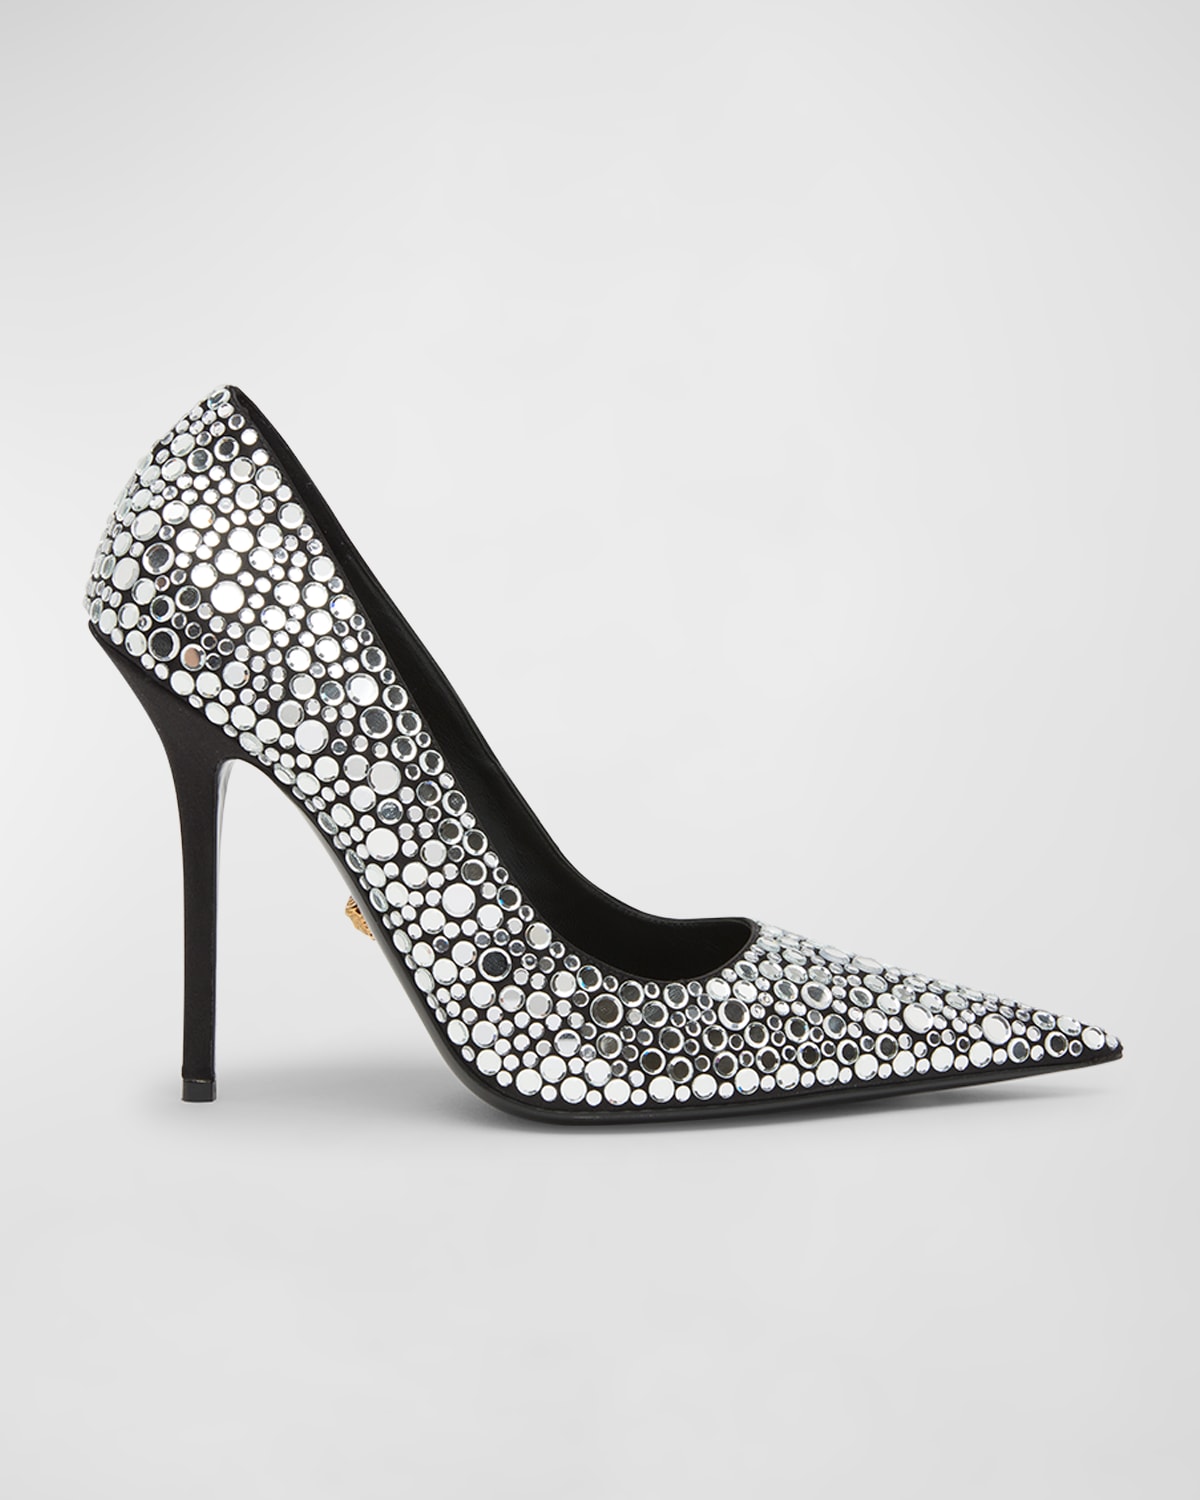 Crystal Stiletto Cocktail Pumps